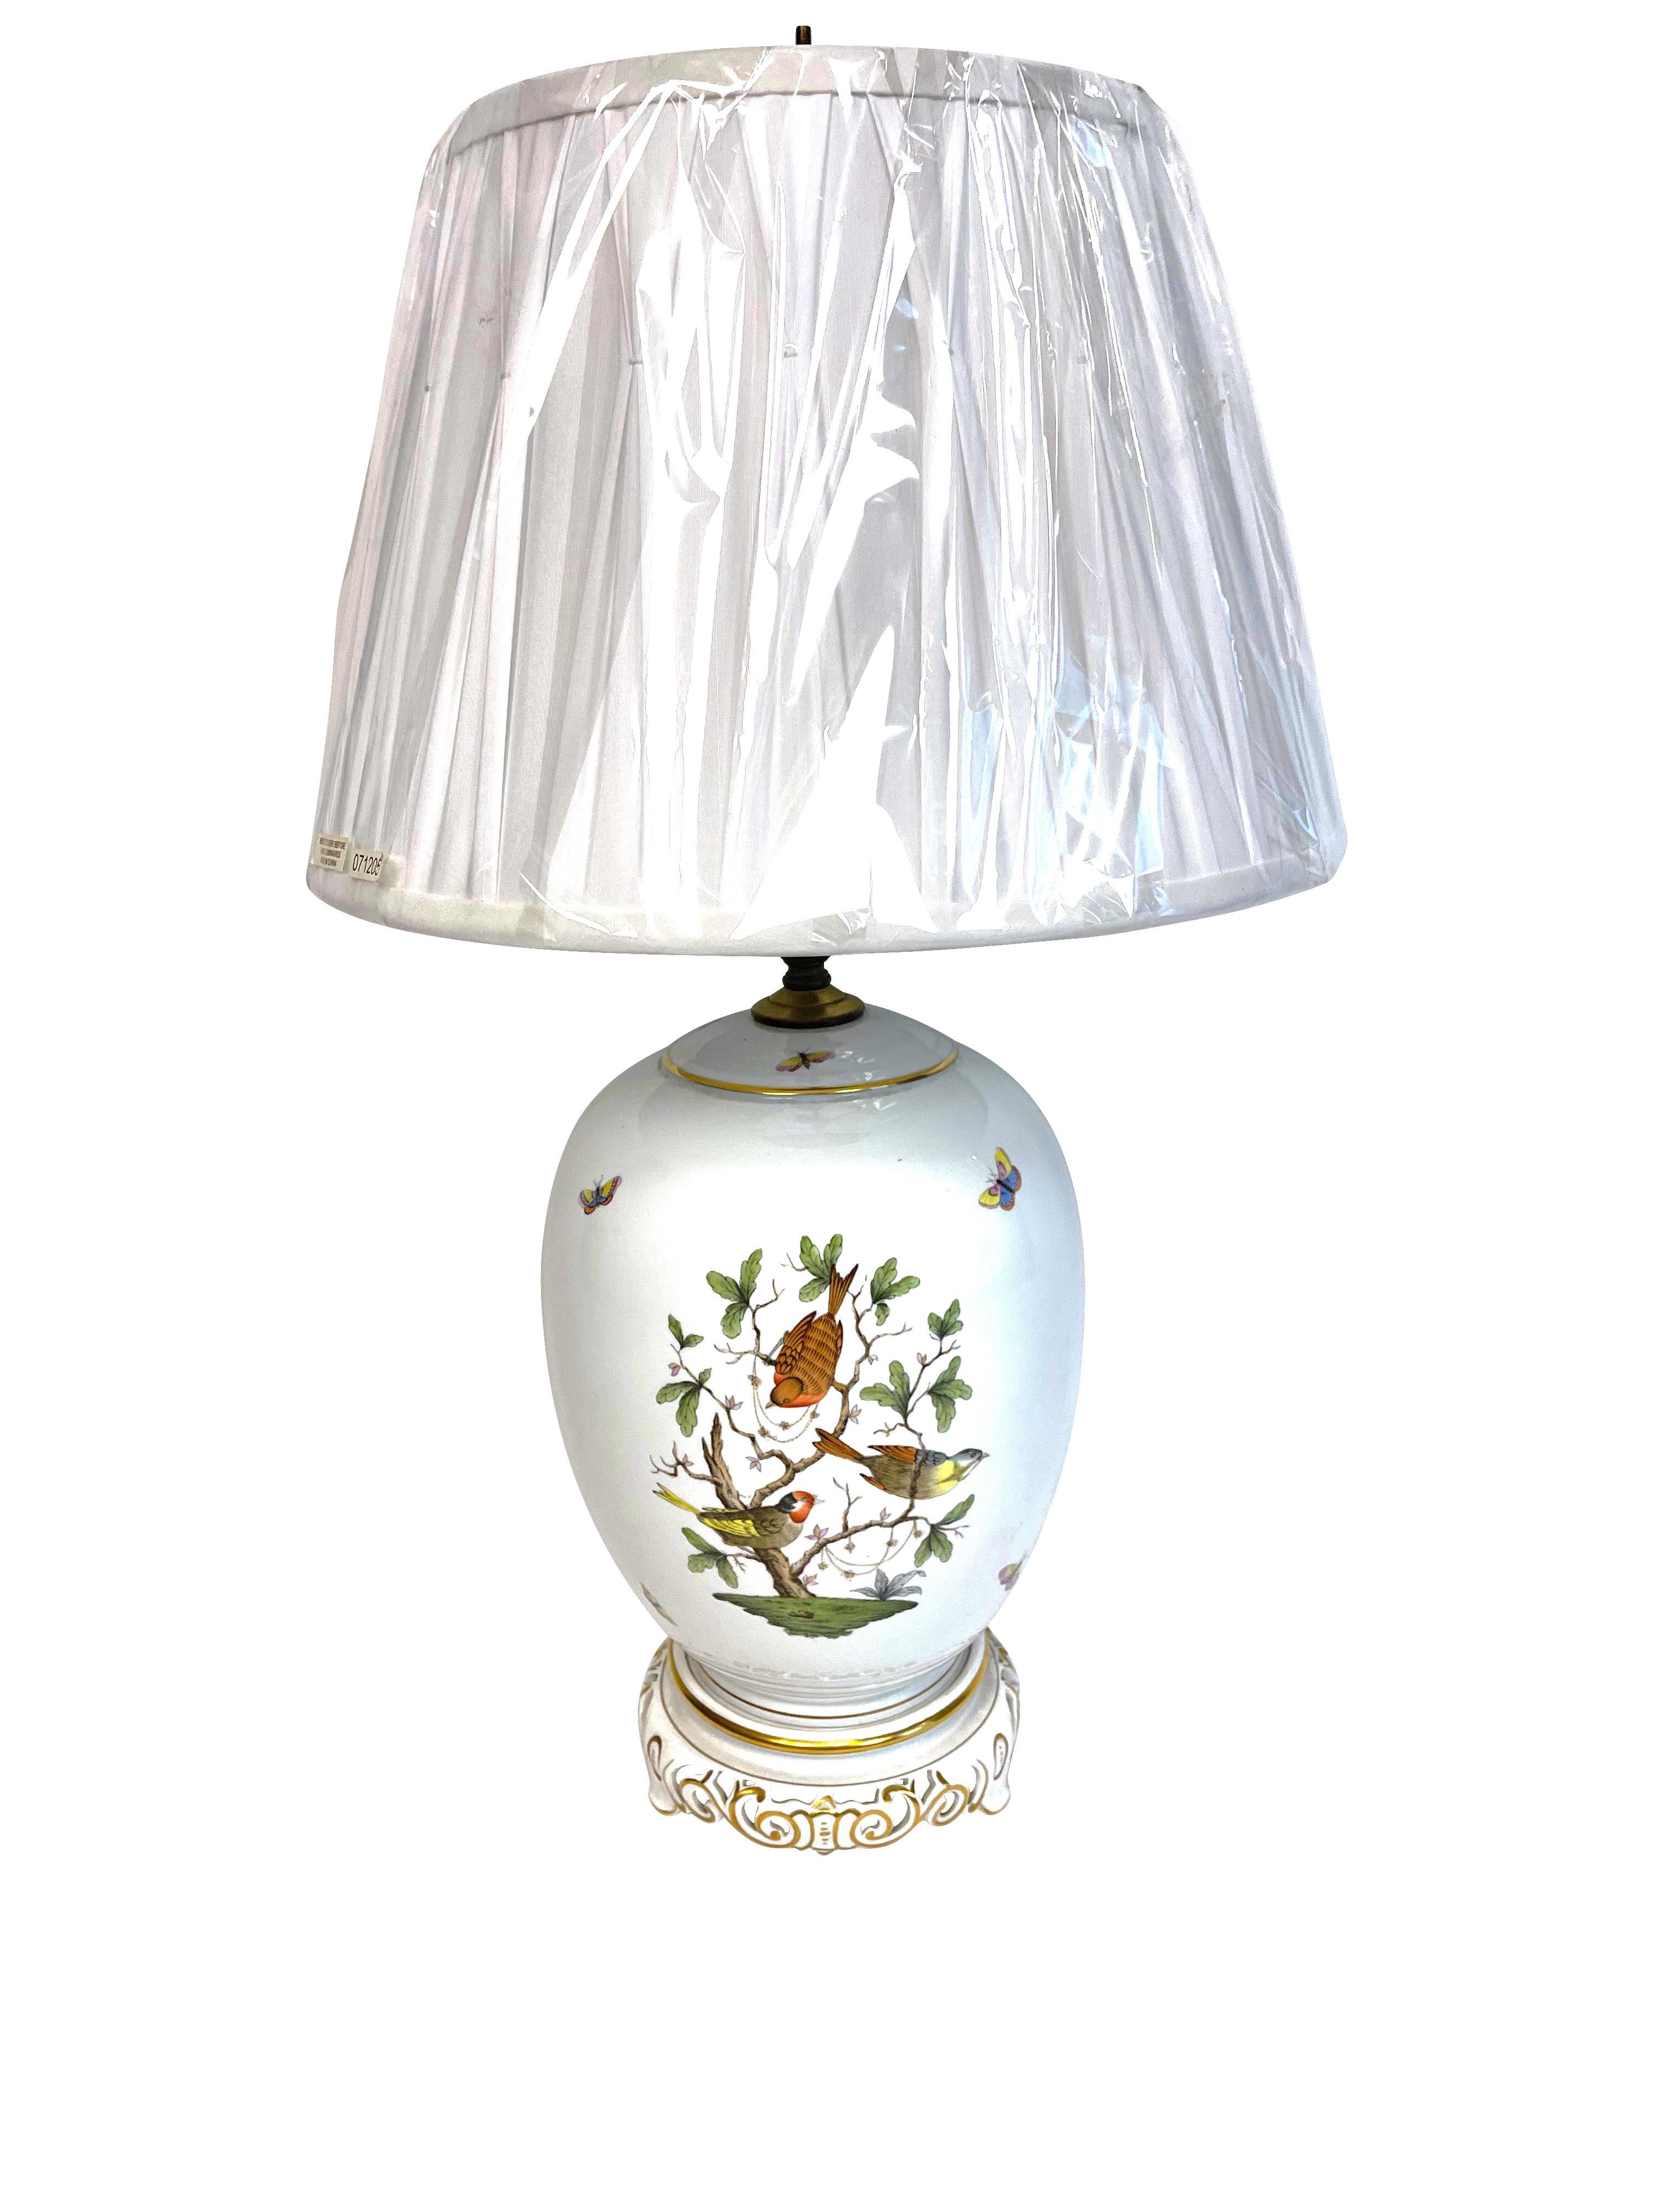 This famous pattern, created in the 1860s for the Baron de Rothschild family, is considered by many to be the paragon of hand-painting on porcelain. This majestic lamp is handmade and hand-painted in Hungary, with an open-work and gold rimmed base.